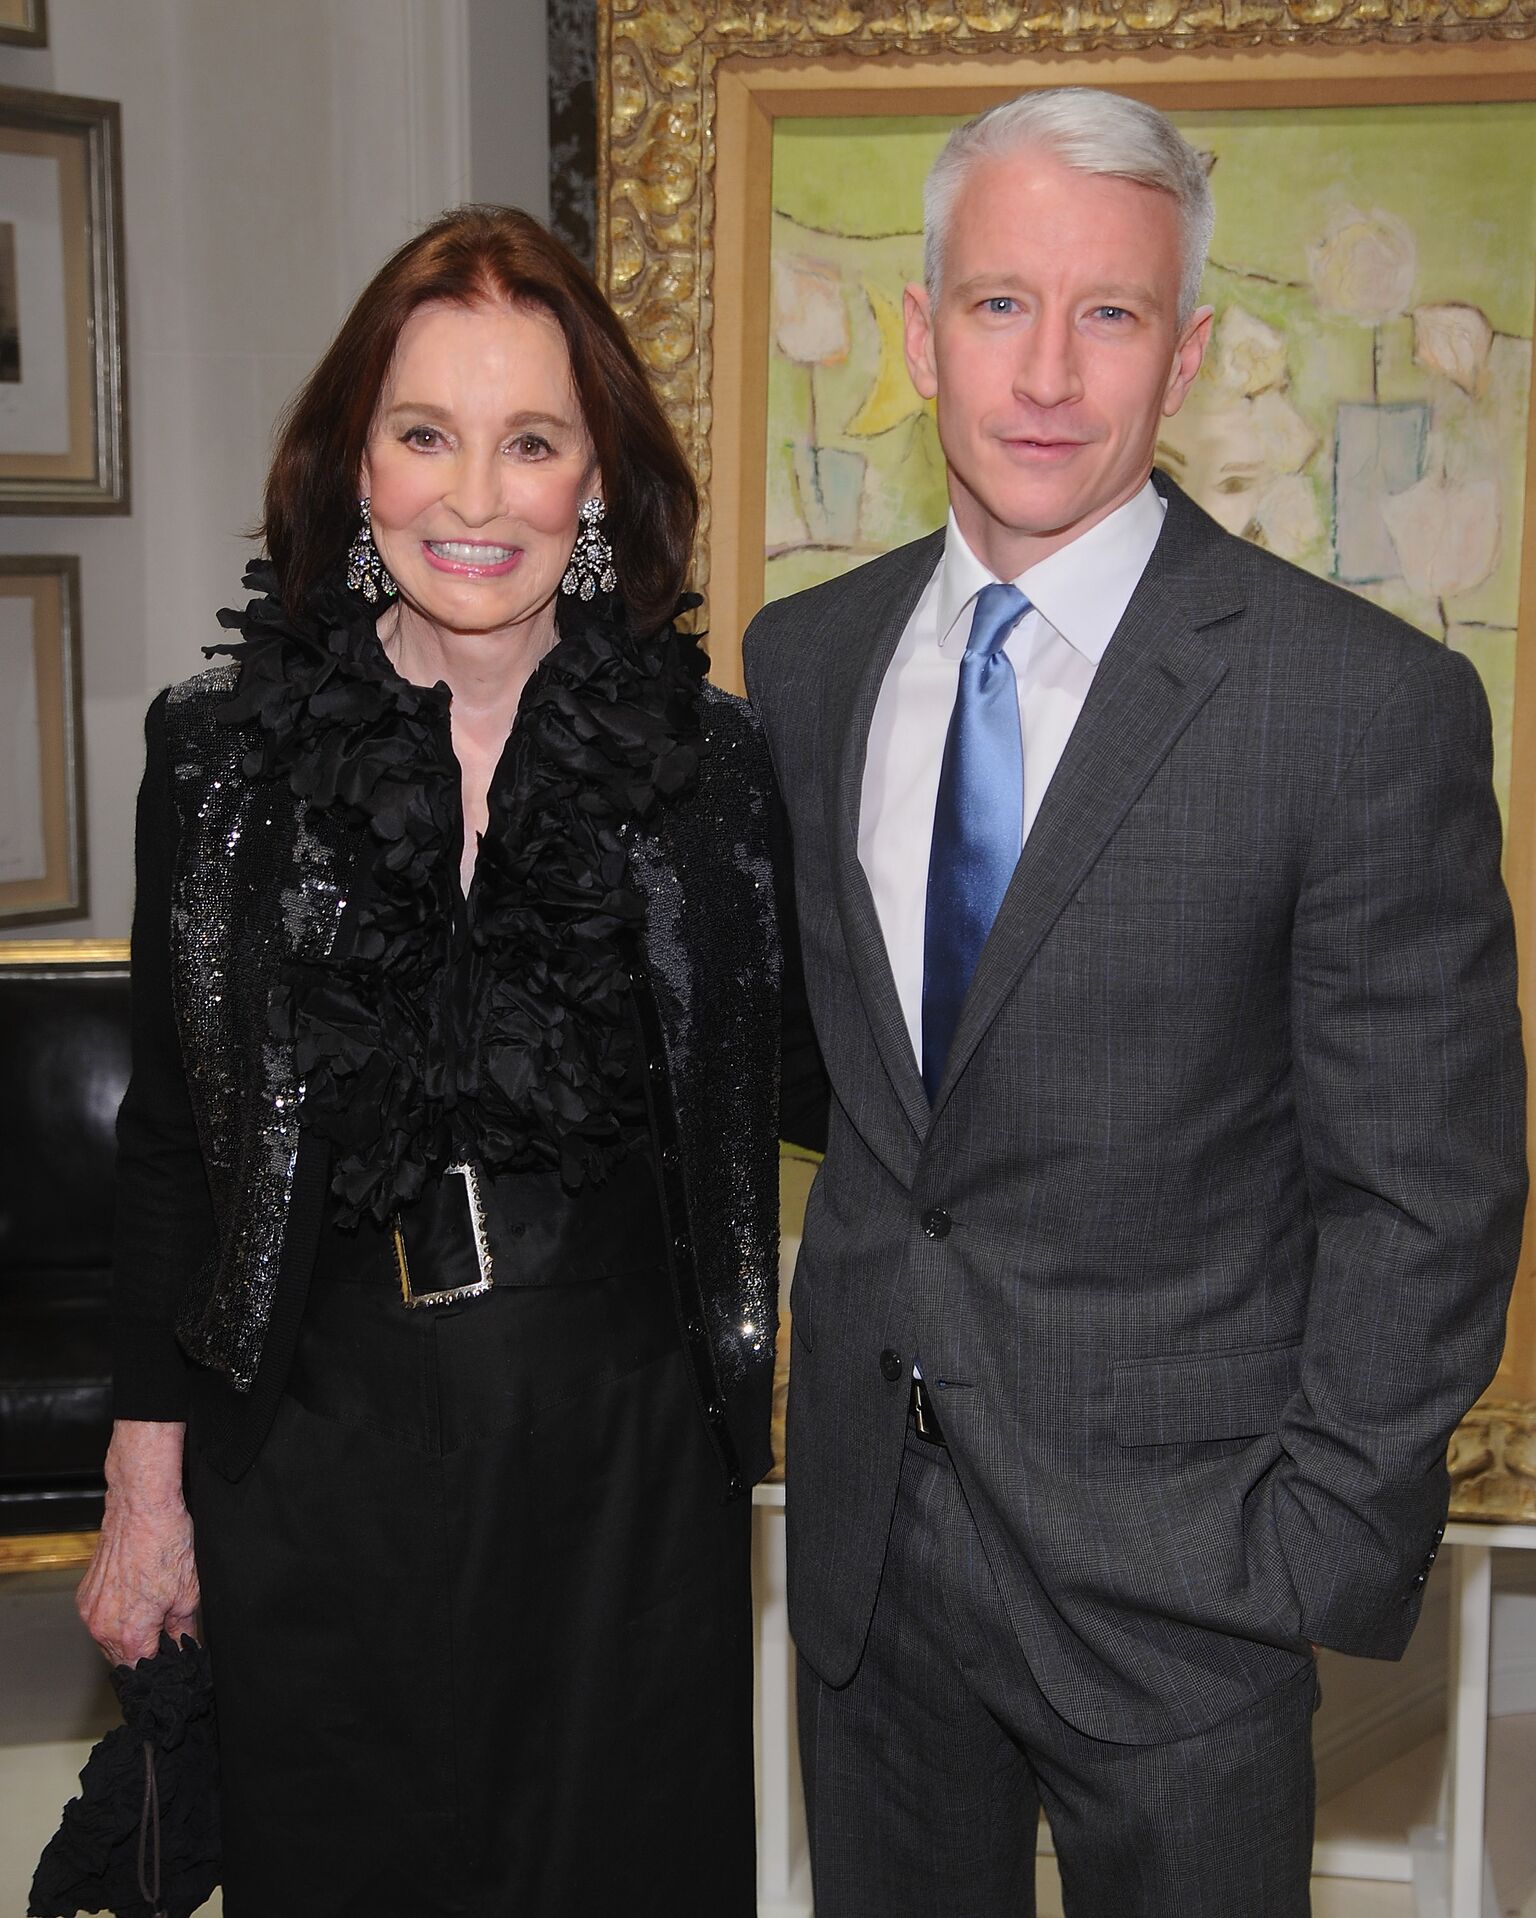 Gloria Vanderbilt and Anderson Cooper at the launch party for "The World Of Gloria Vanderbilt" | Getty Images